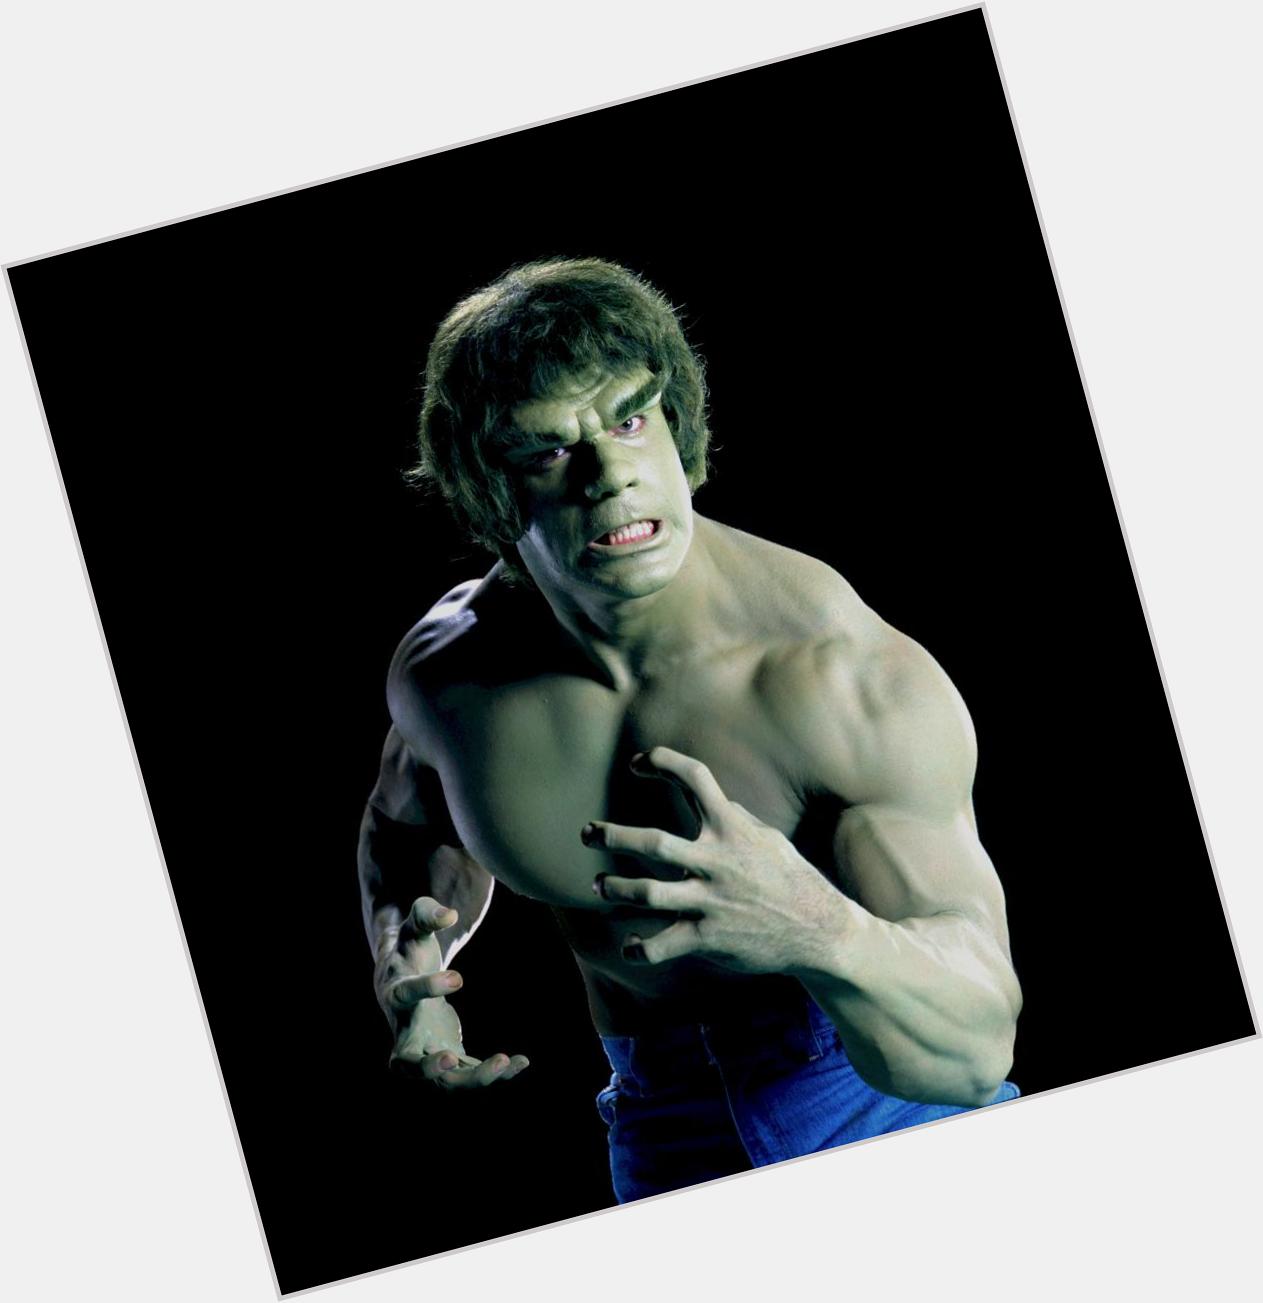 Happy 63rd Birthday to the man who scared me as a small child..Lou Ferrigno. 